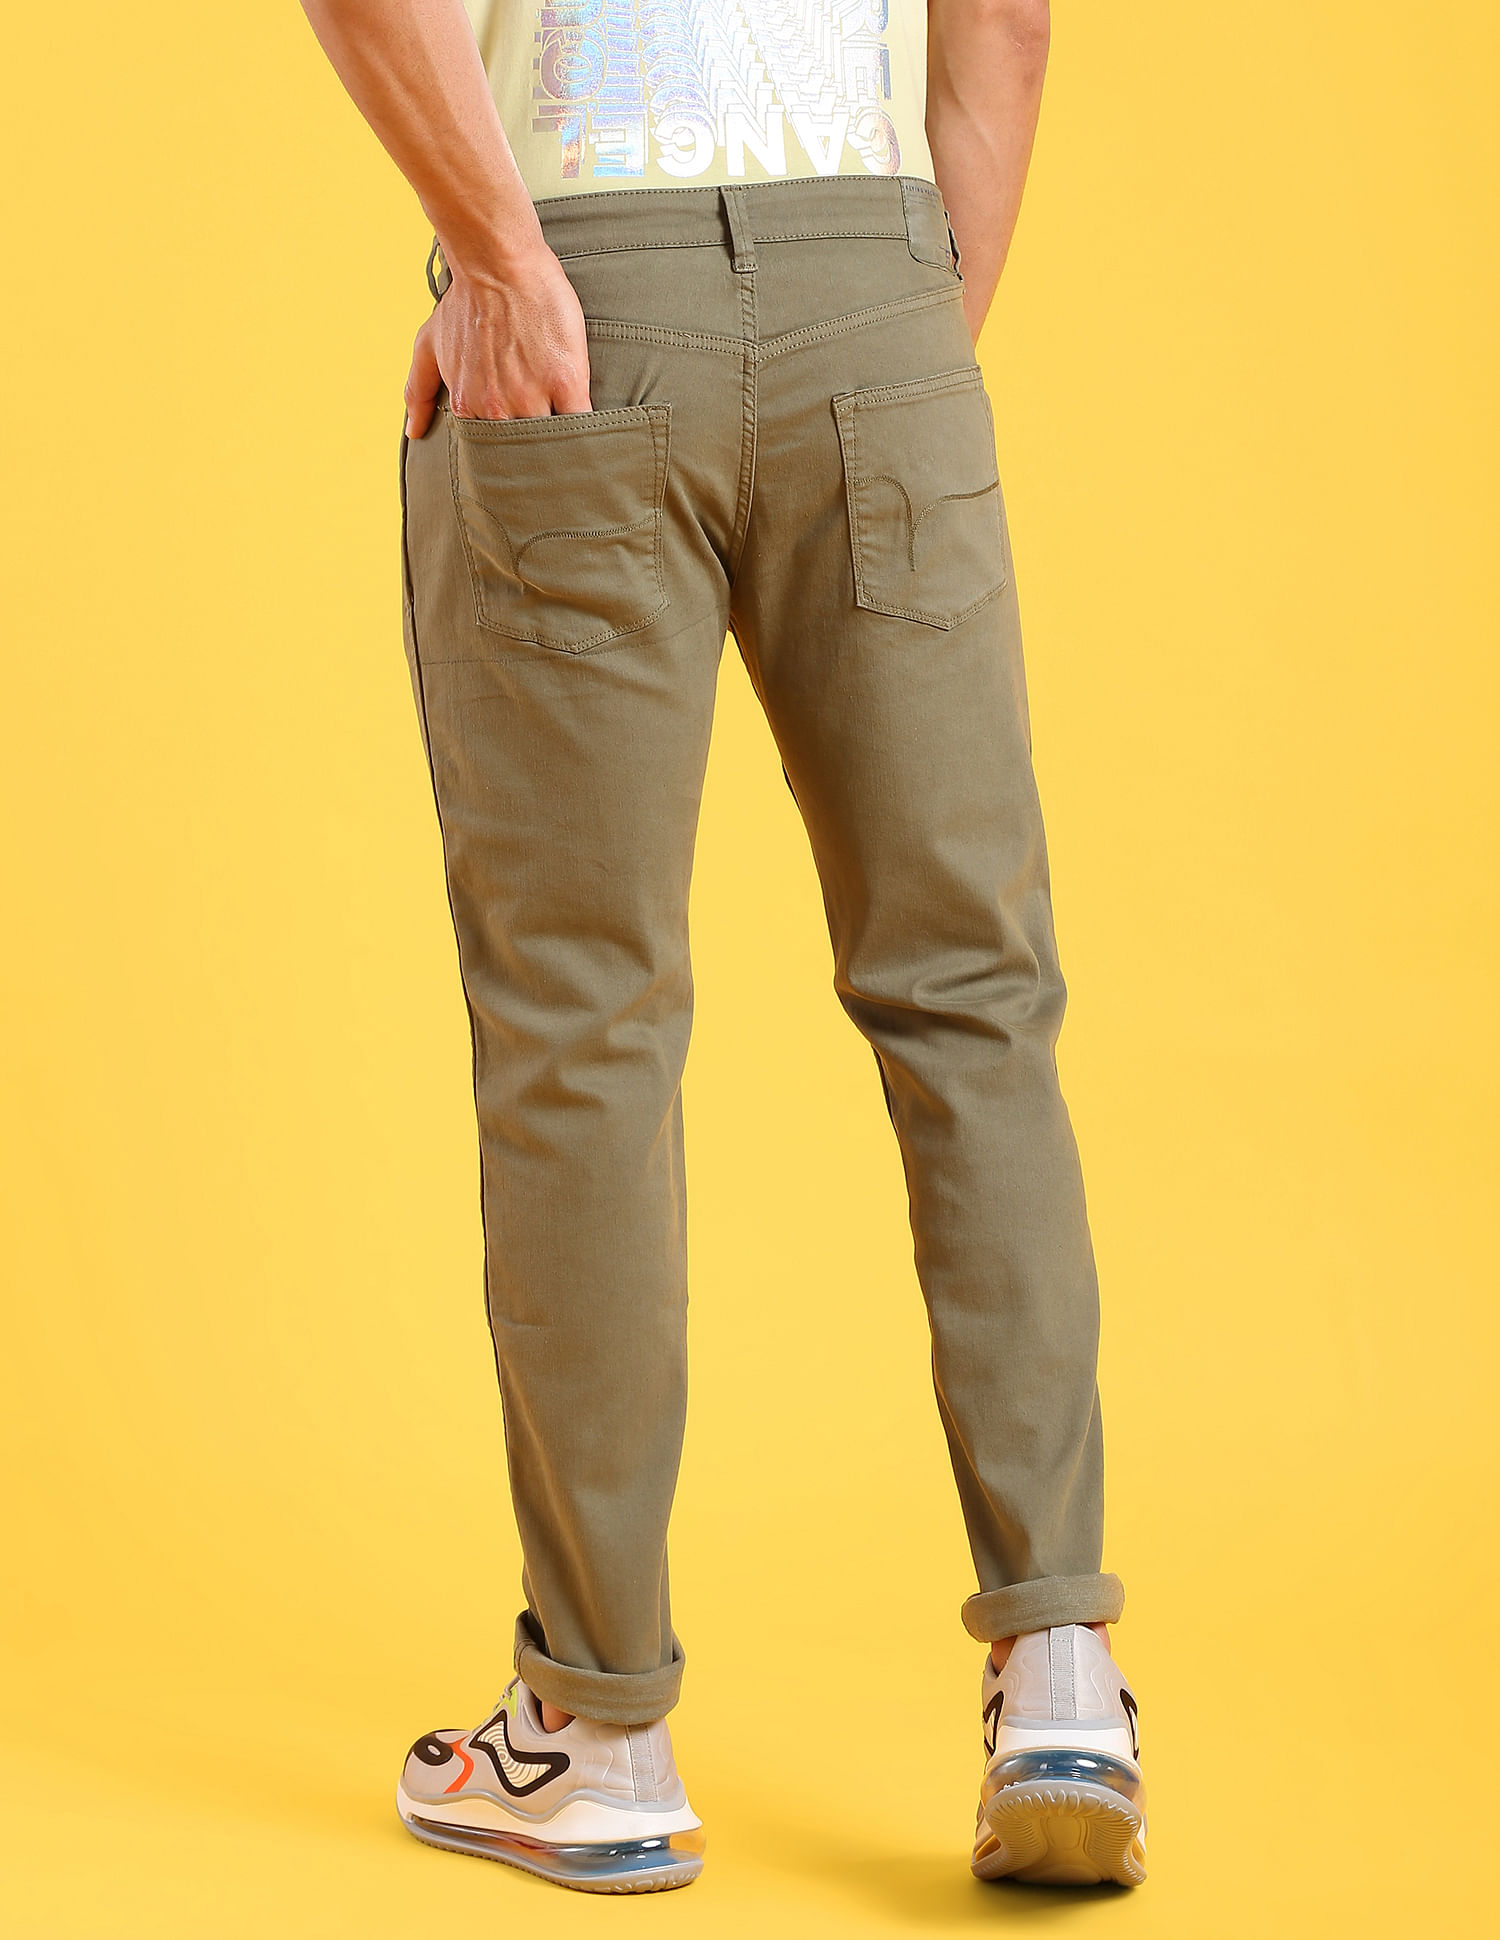 Flying Machine Jeans  Get upto 60 off on Flying Machine Jeans Online at  Myntra